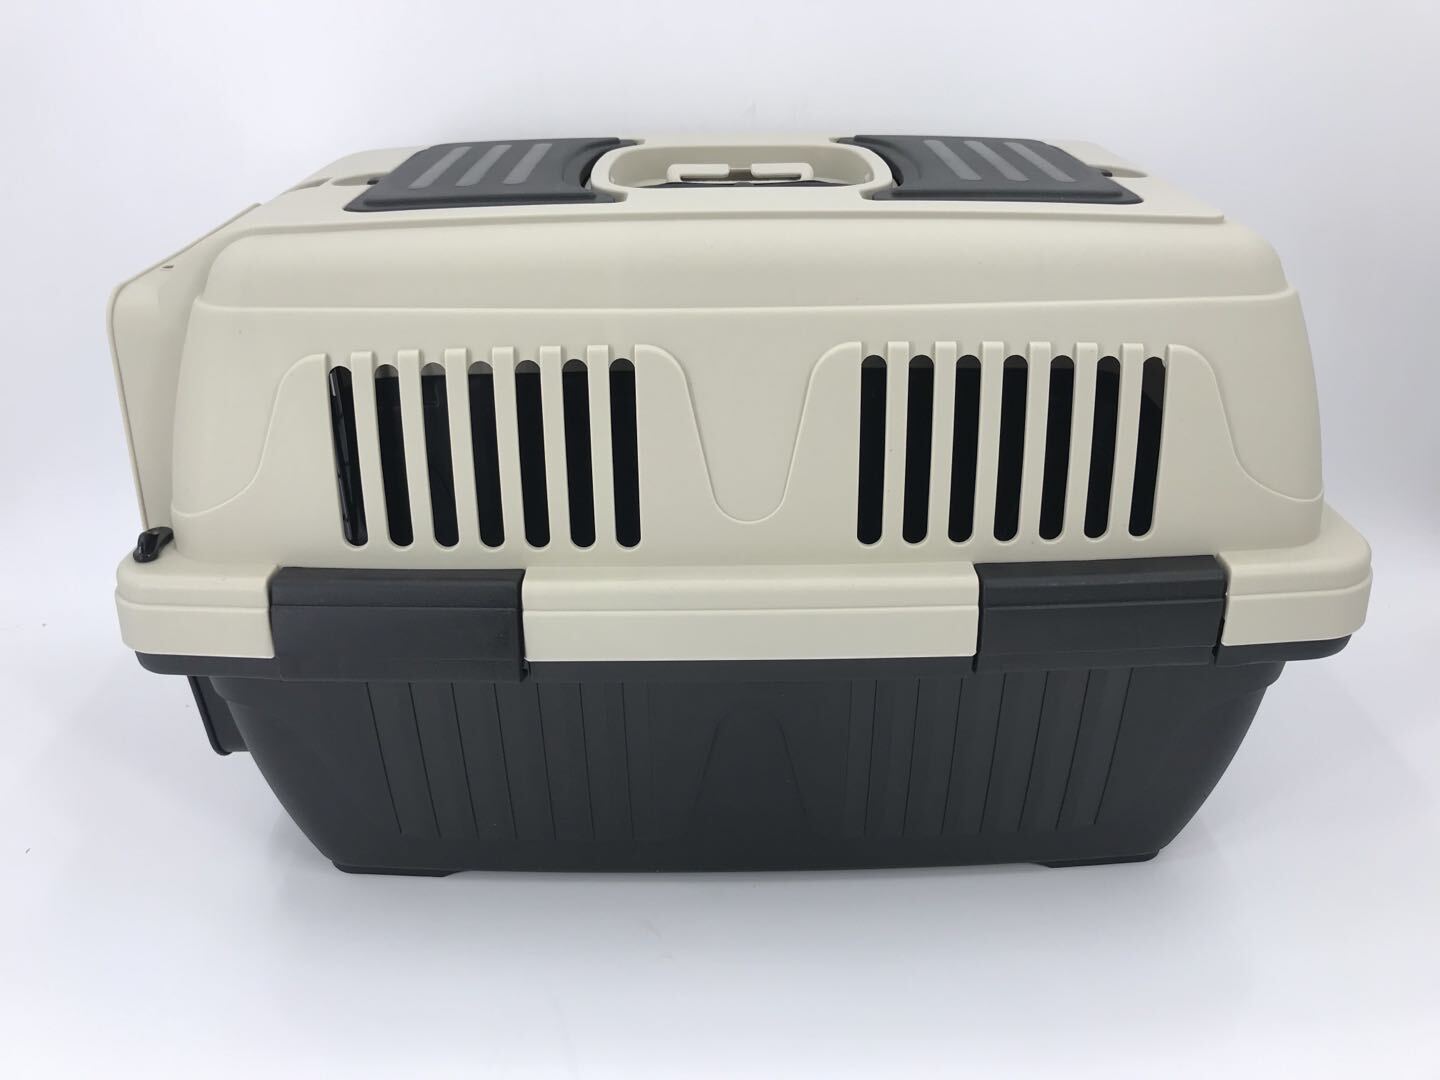 YES4PETS Medium Portable Dog Cat House Pet Carrier Travel Bag Cage+Safety Lock & Food Box